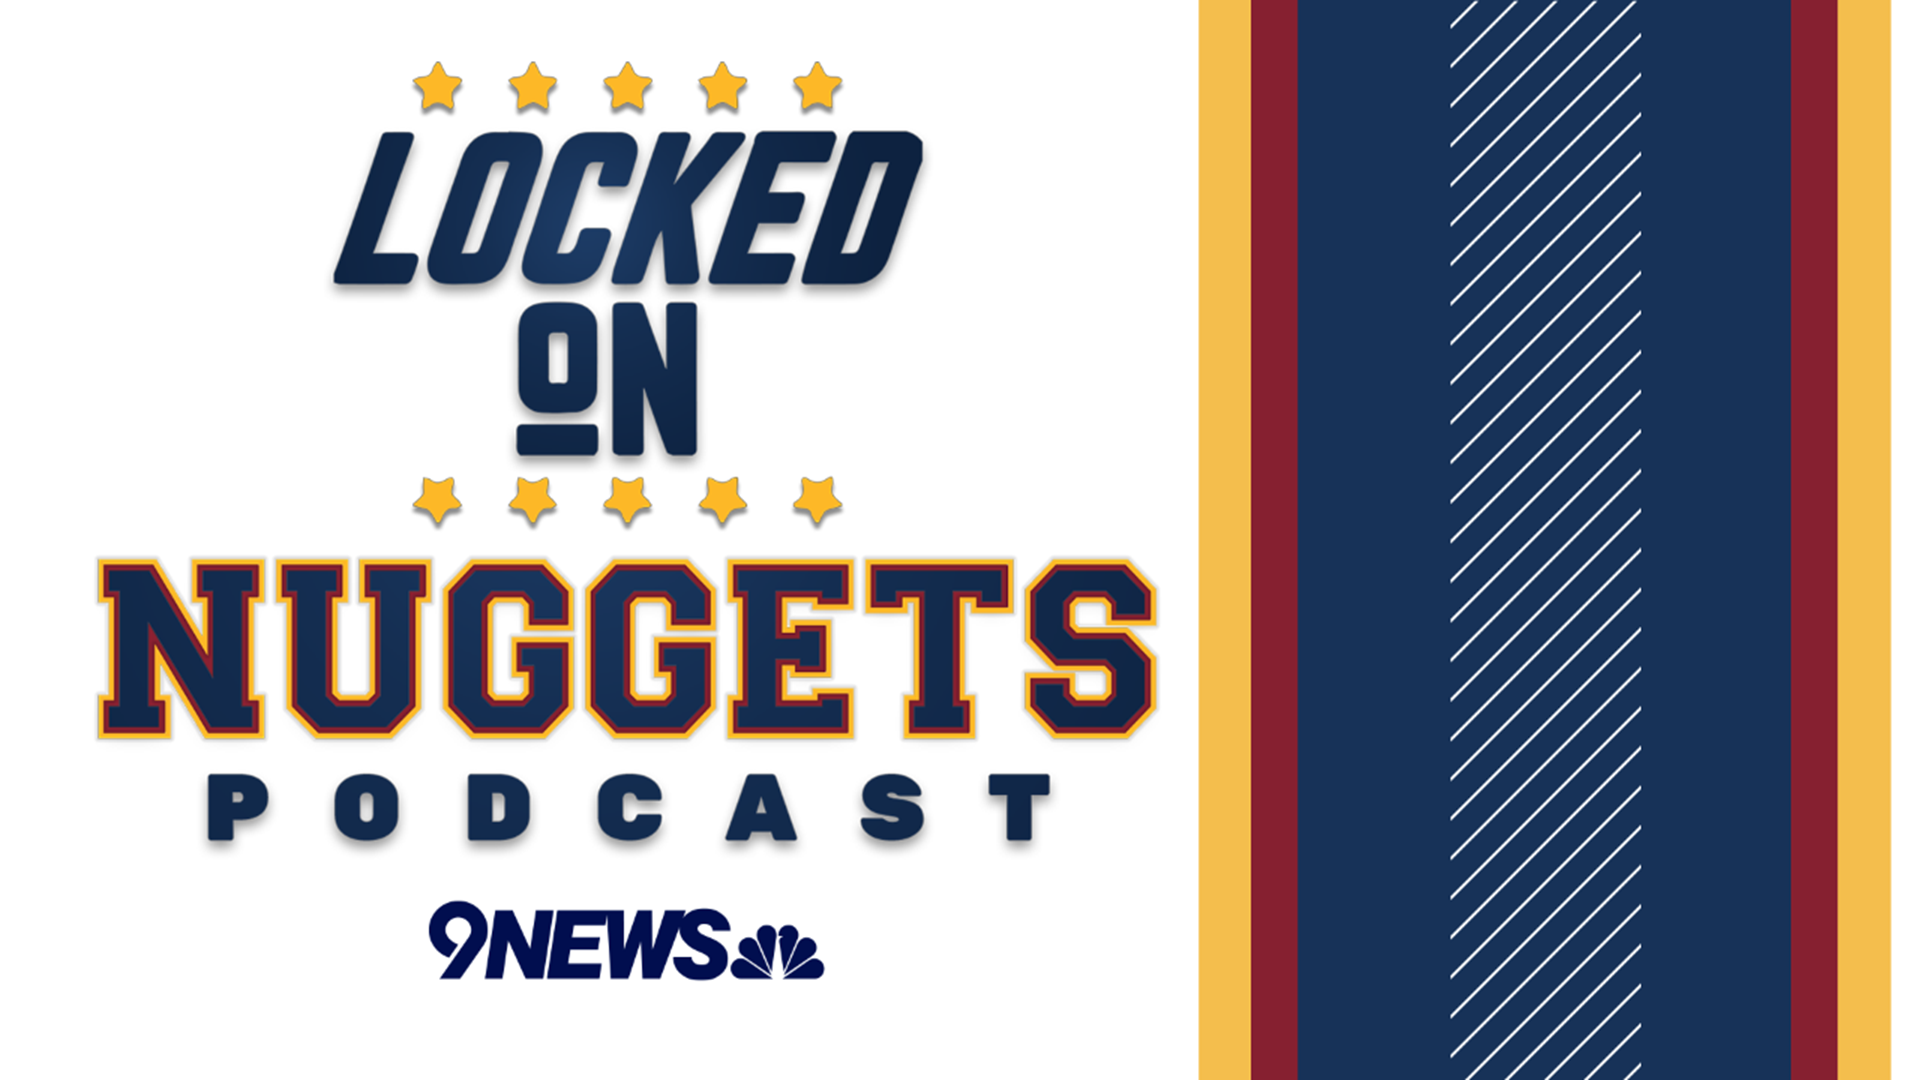 We talk whether Michael Porter Jr. will start for the Nuggets, the latest out of training camp is, and how the Nuggets stack up in a tougher Northwest Division.